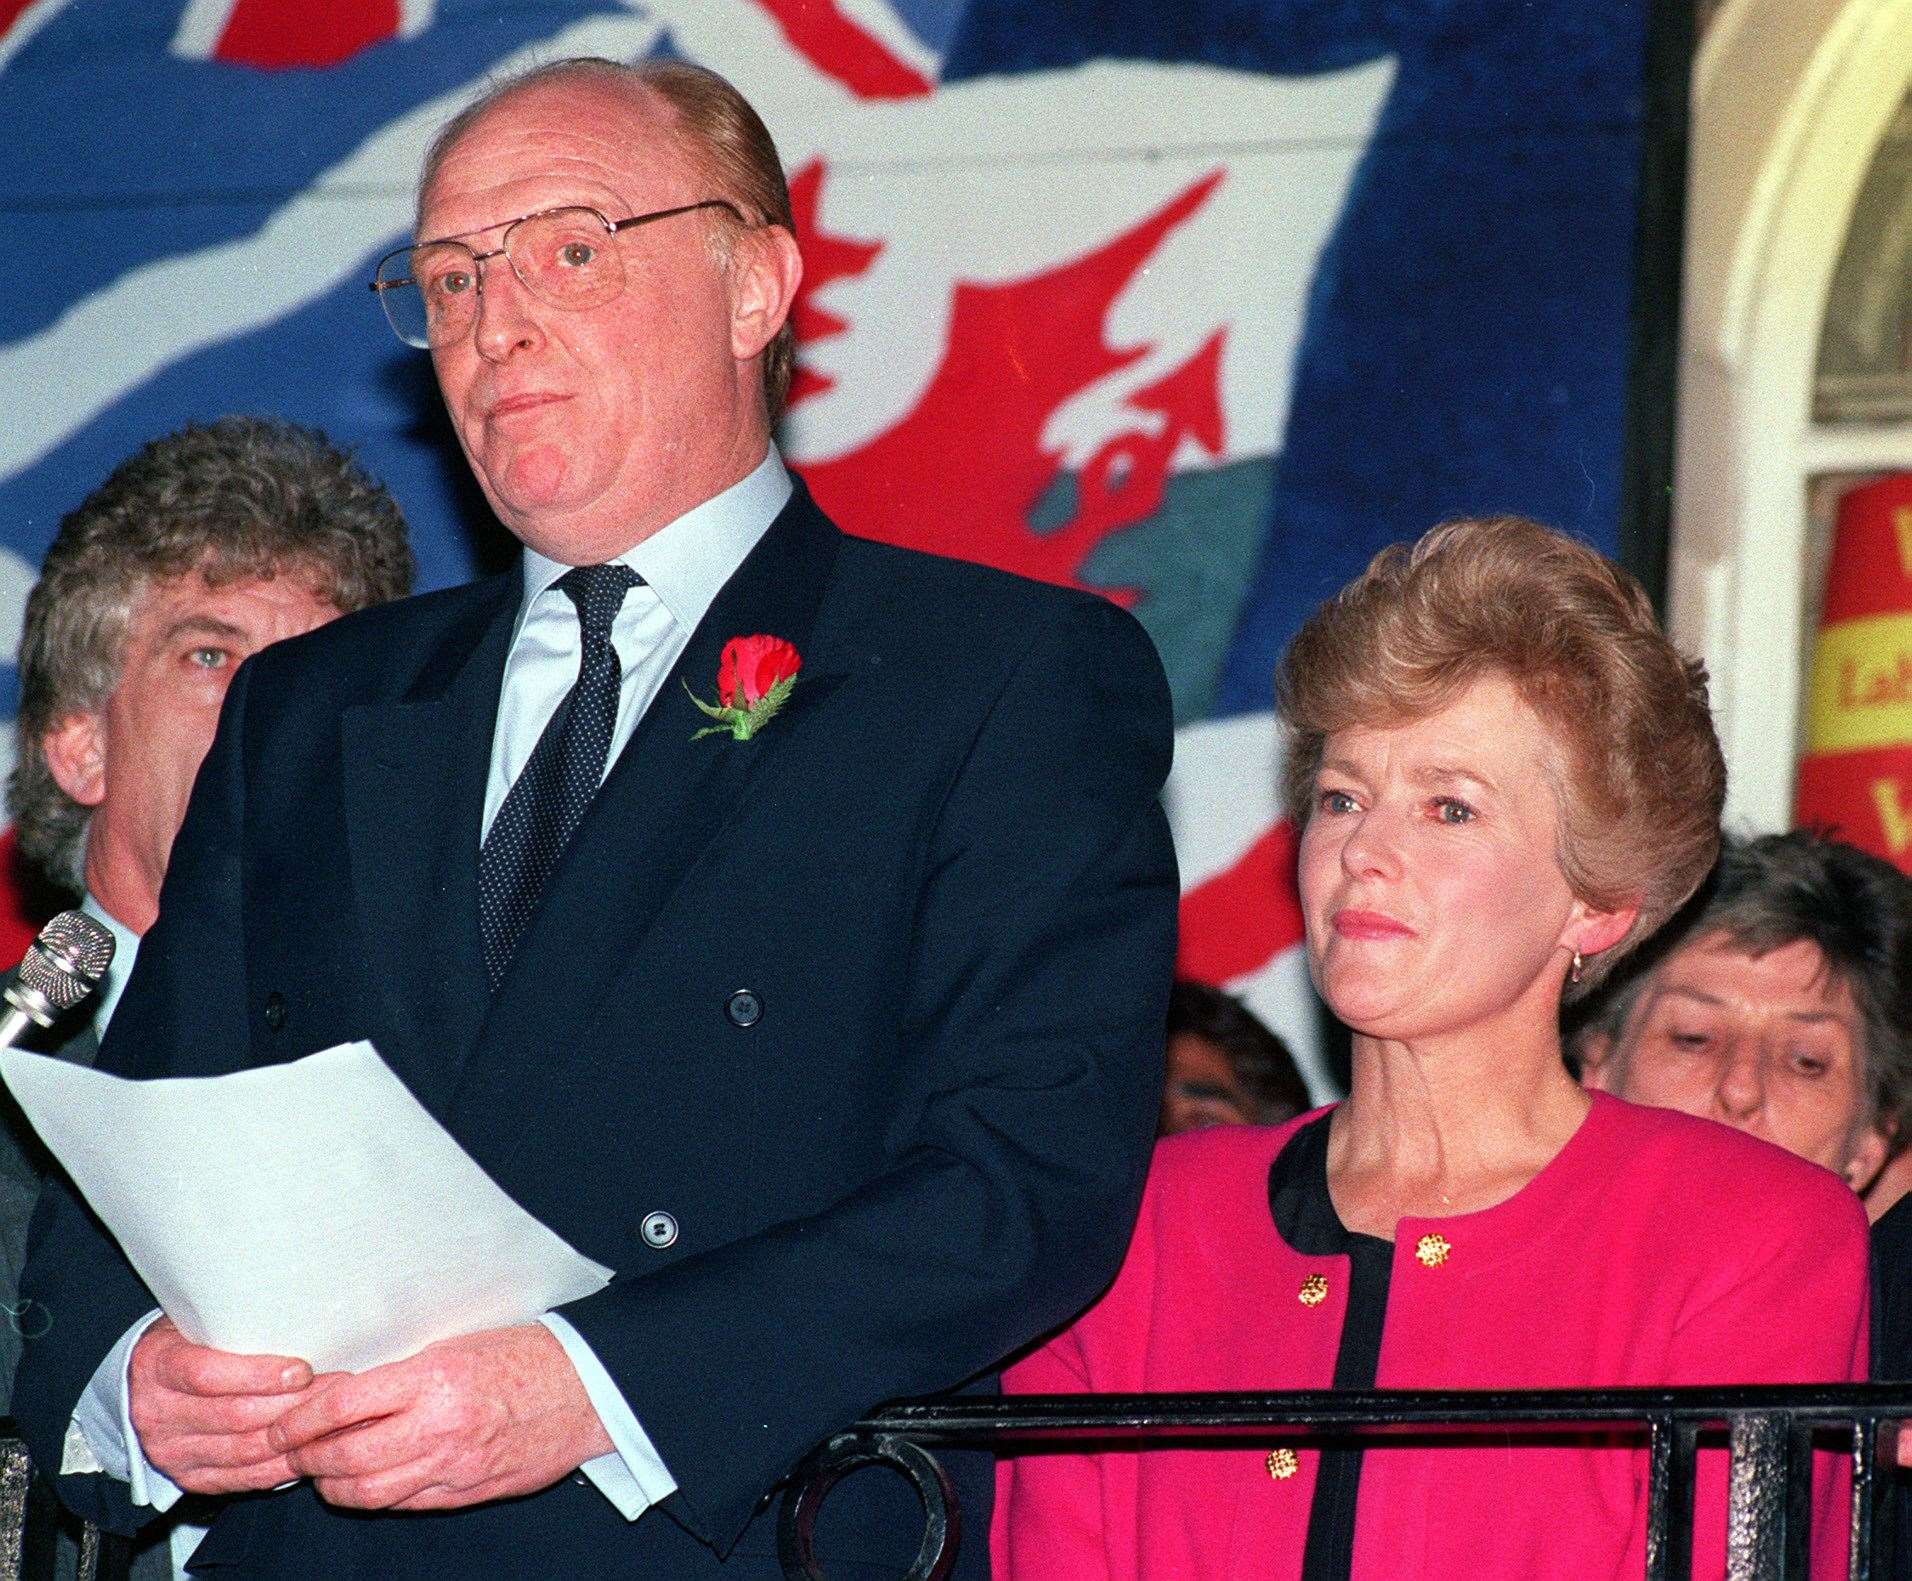 Then Labour leader Neil Kinnock, with his wife Glenys (right), makes his concession speech outside the Labour Party HQ in Walworth Road following their defeat in the 1992 general election (Fiona Hanson/PA)